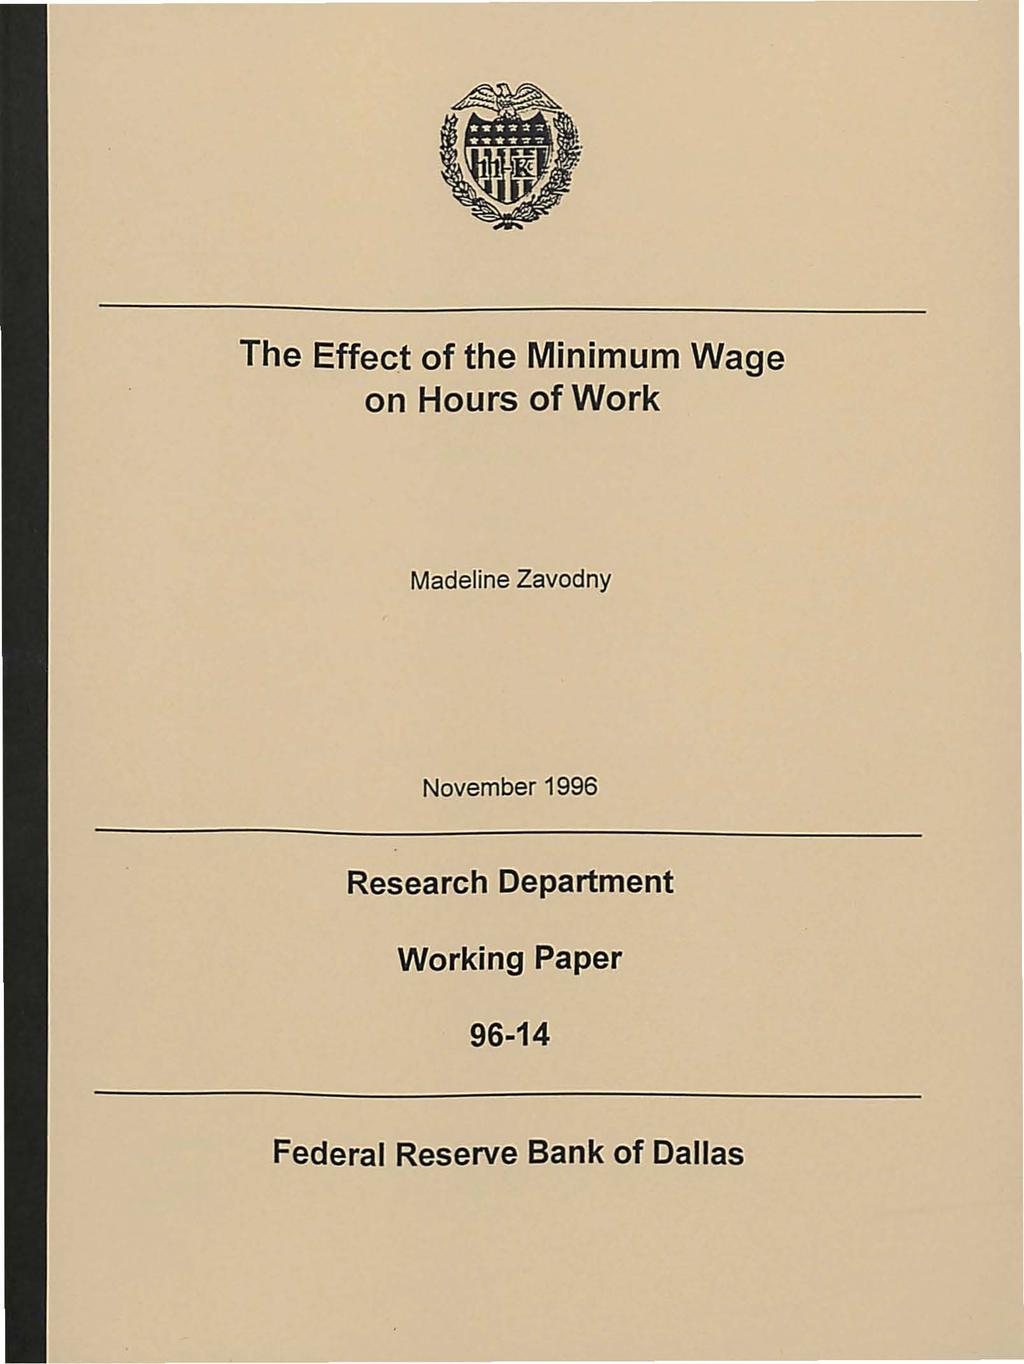 The Effect of the Minimum Wage on Hours of Work Madeline Zavodny November 1996 Research Department Working Paper 96-14 Federal Reserve Bank